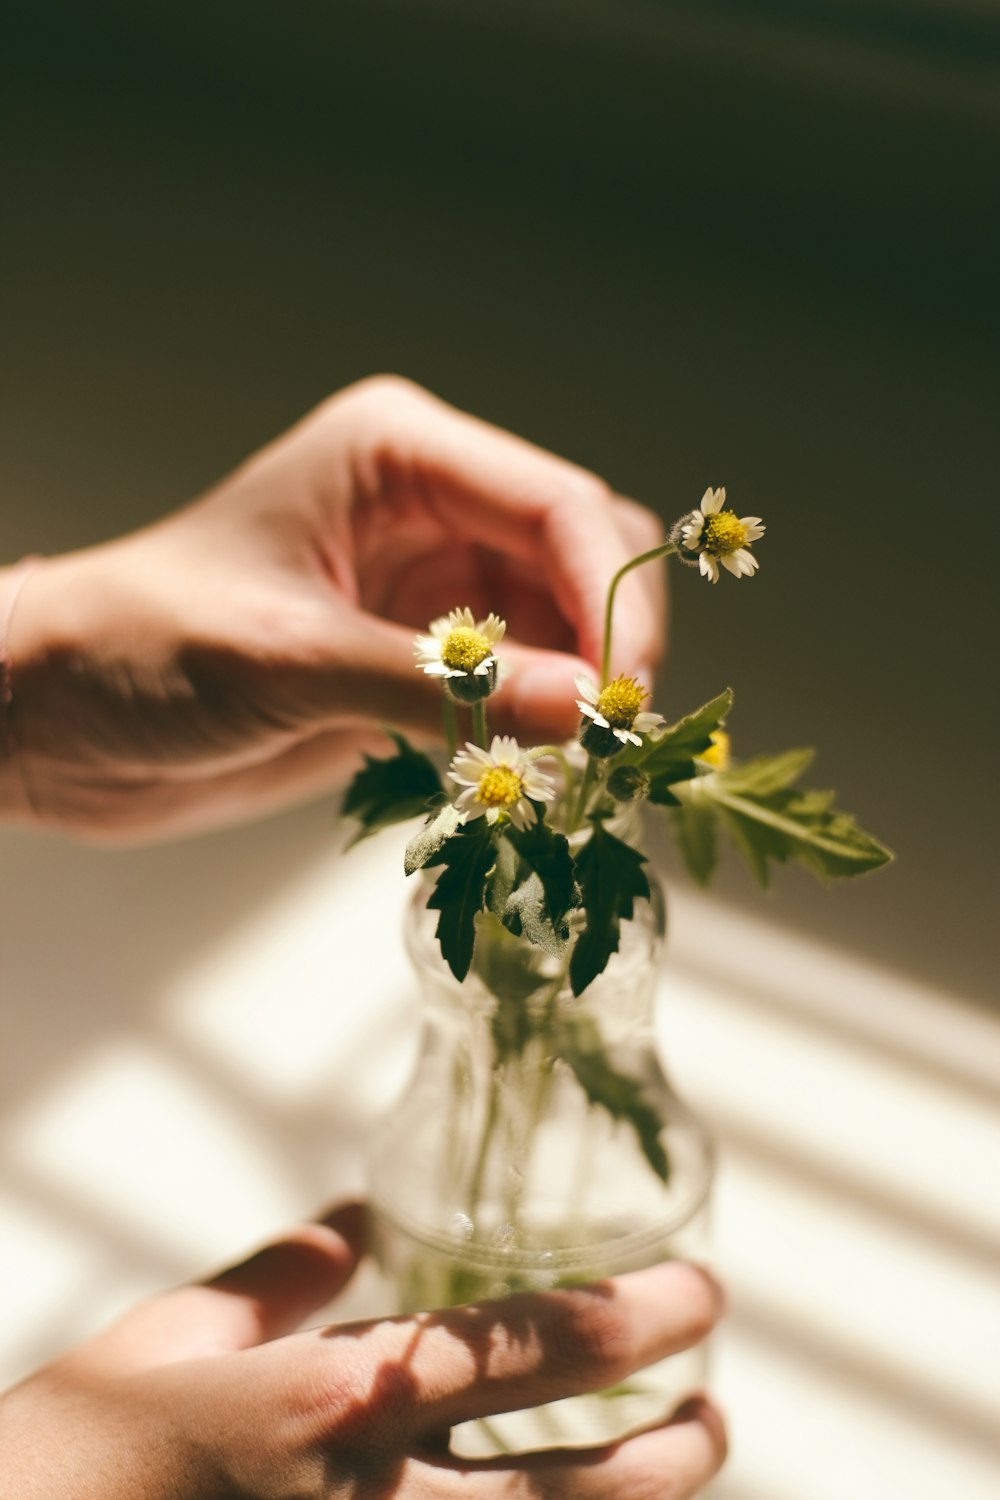 person's hands holding white daisy flower's leaf and clear glass vase